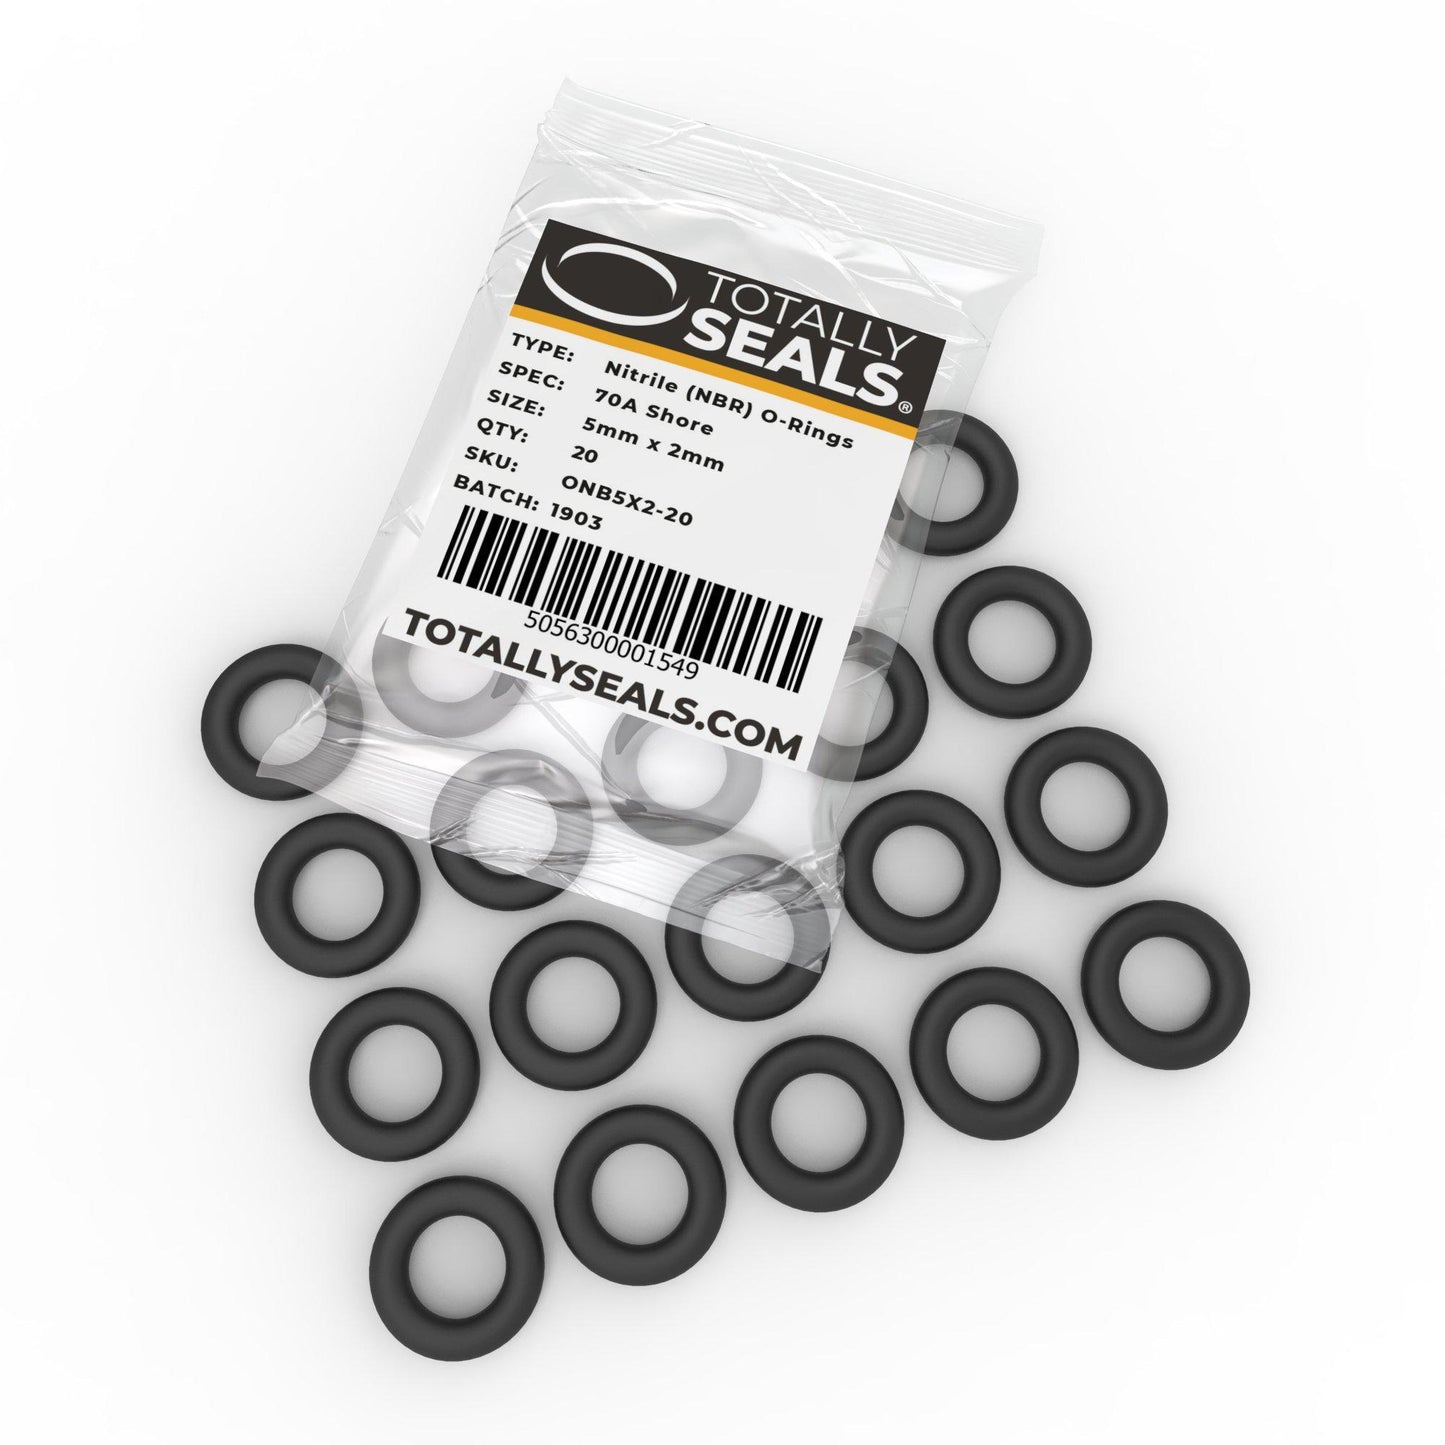 5mm x 2mm (9mm OD) Nitrile O-Rings - Totally Seals®